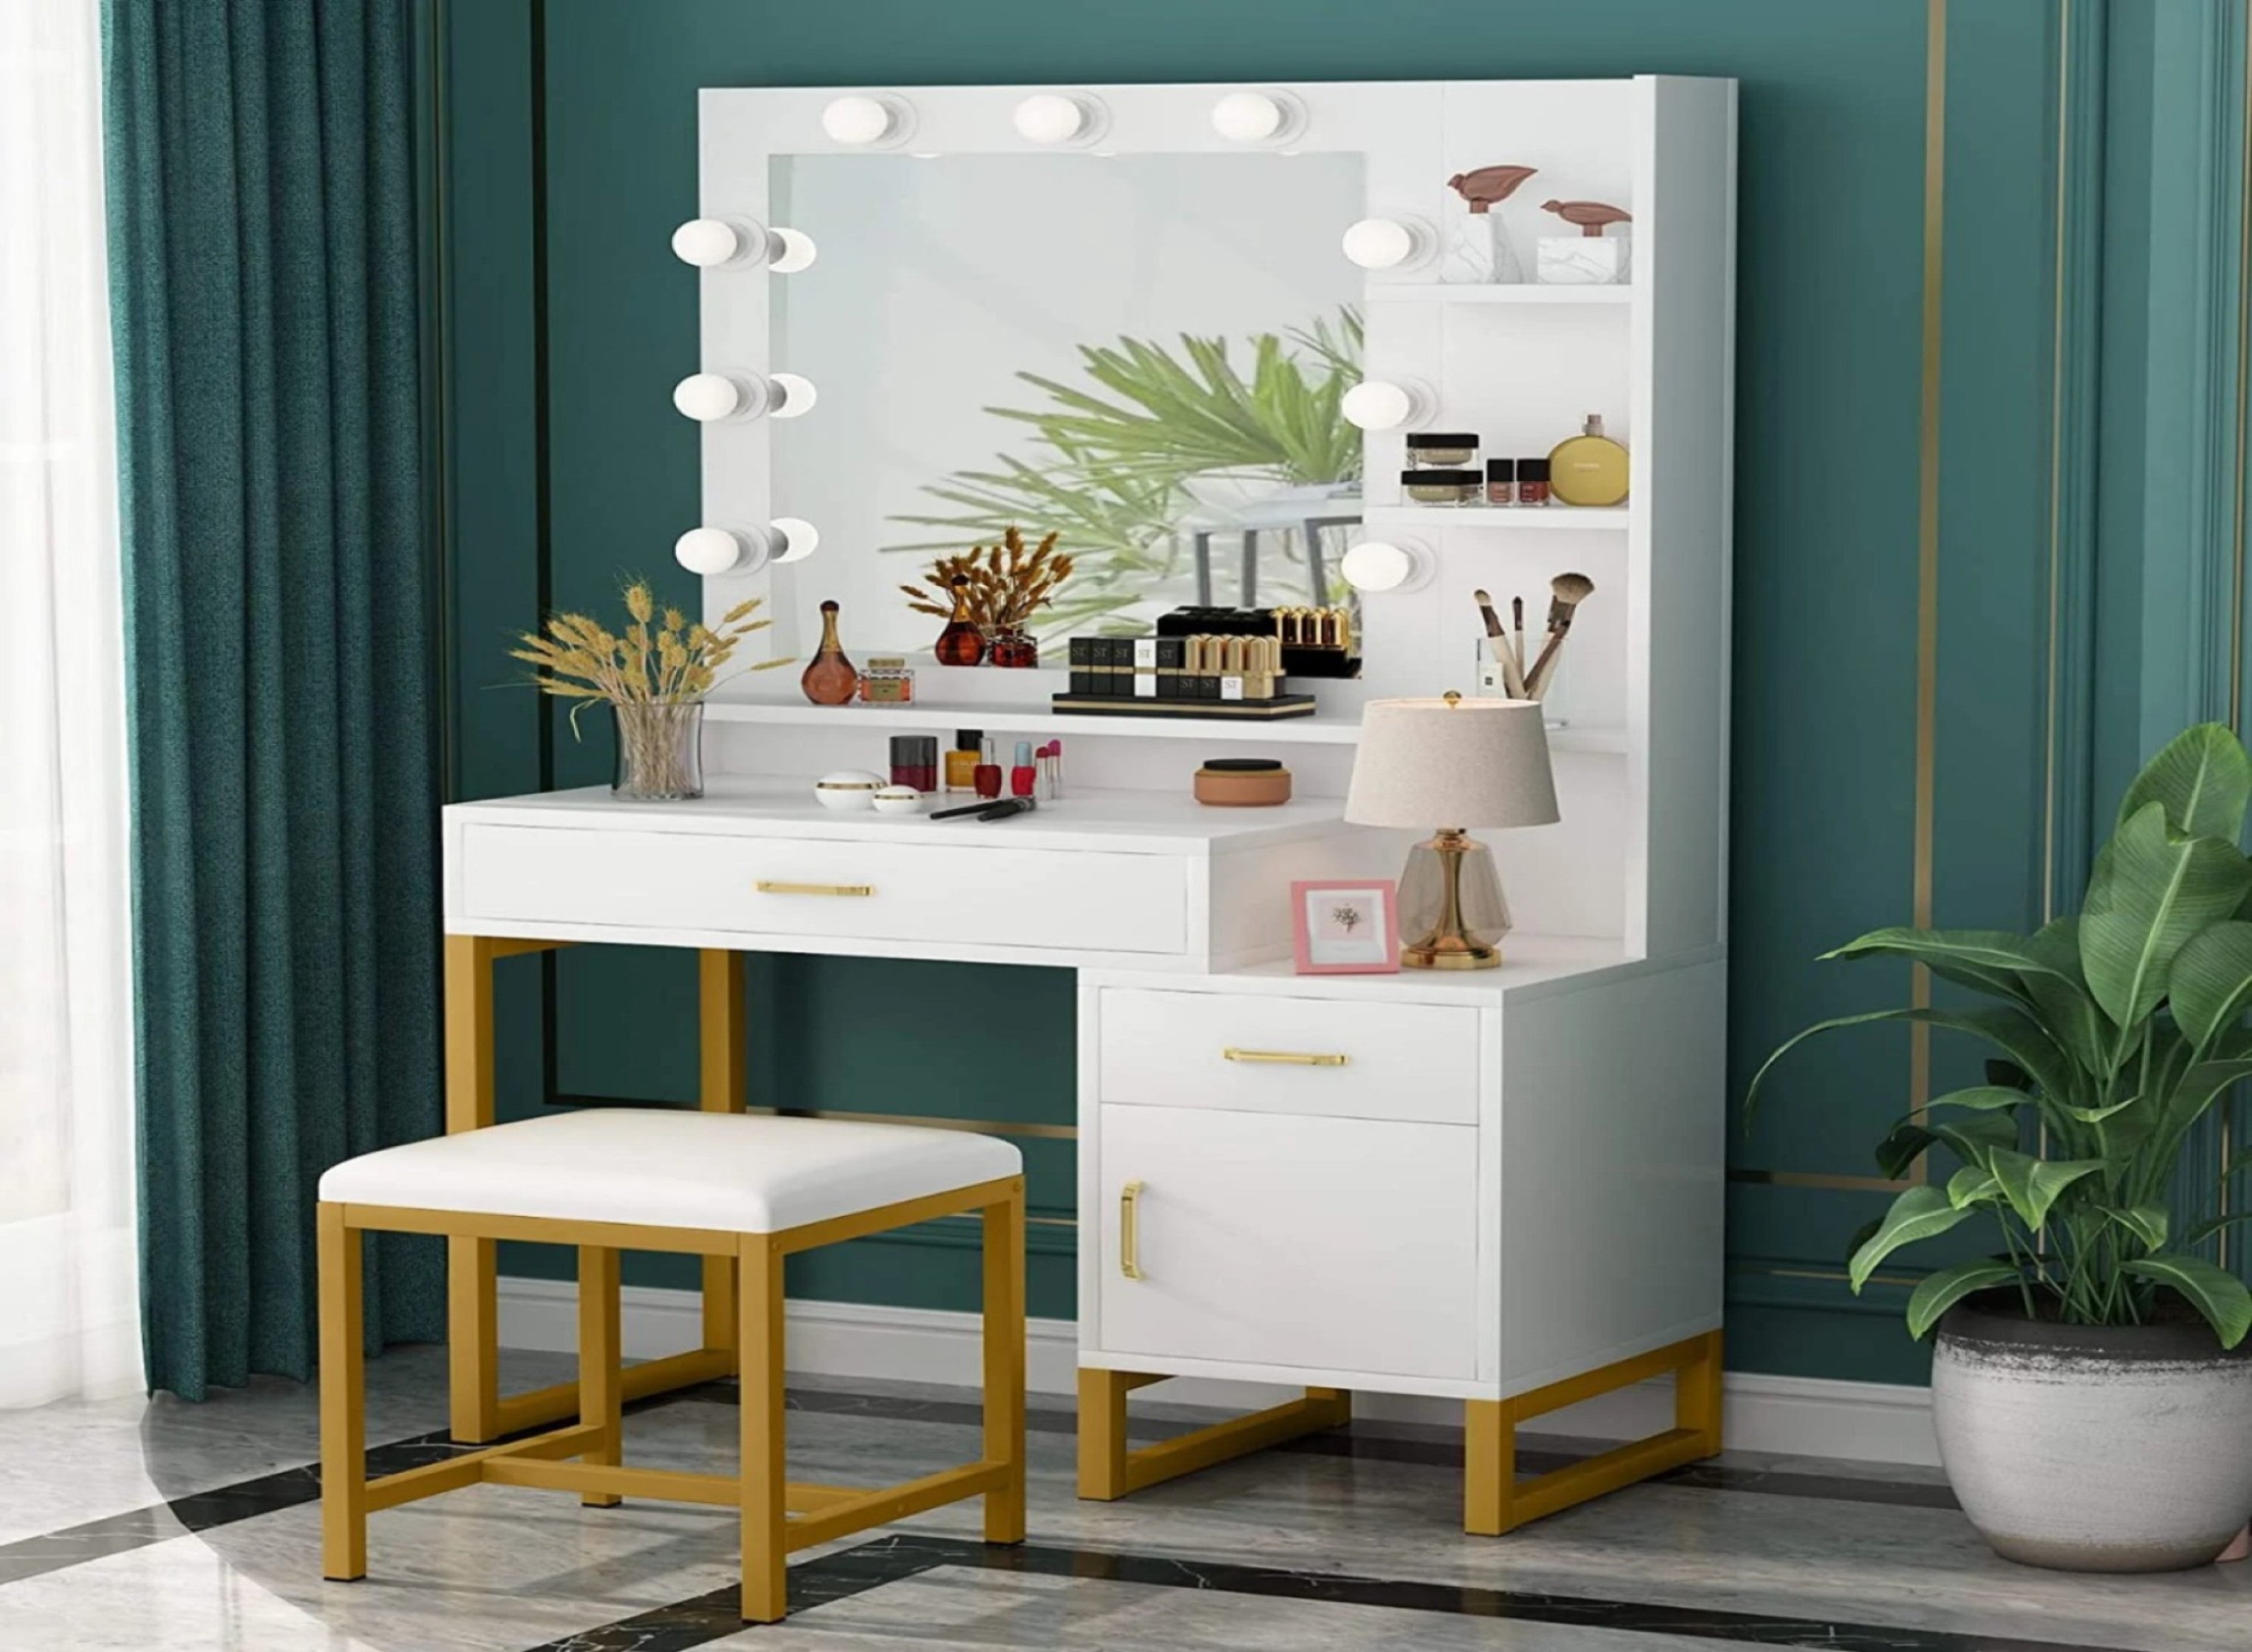 Dressing table designs to inspire your imagination | Housing News